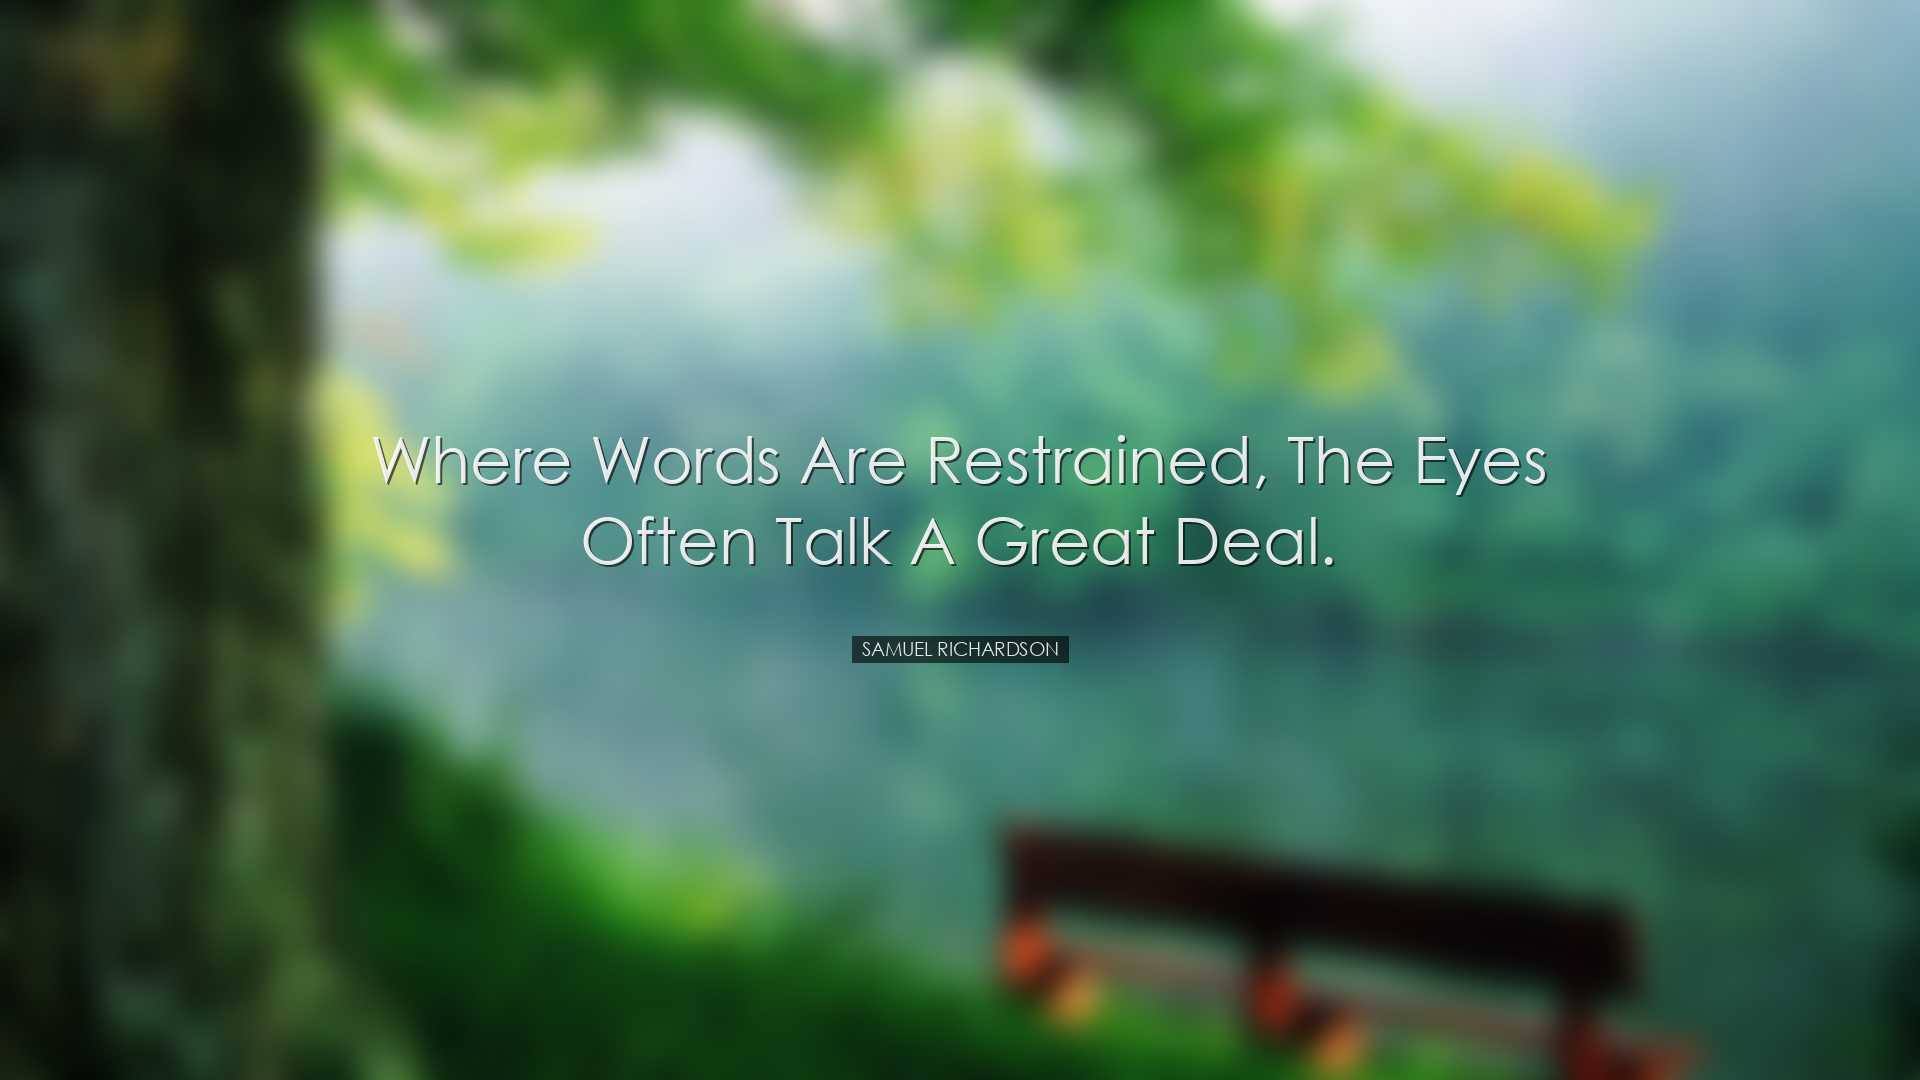 Where words are restrained, the eyes often talk a great deal. - Sa